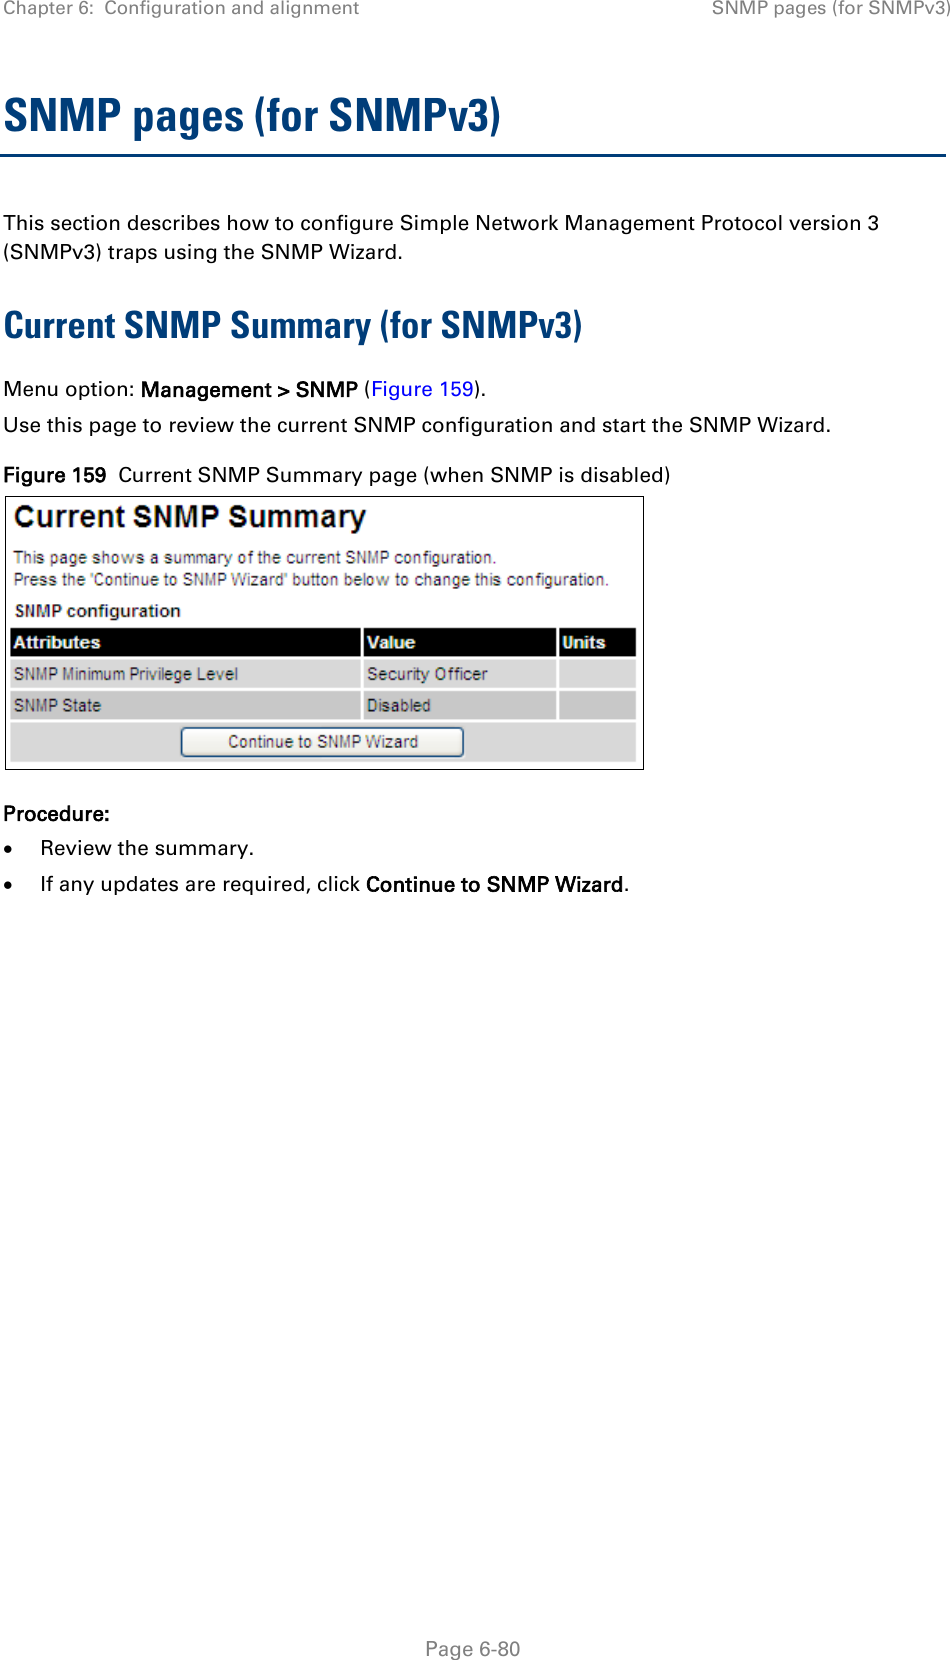 Chapter 6:  Configuration and alignment SNMP pages (for SNMPv3)  SNMP pages (for SNMPv3) This section describes how to configure Simple Network Management Protocol version 3 (SNMPv3) traps using the SNMP Wizard. Current SNMP Summary (for SNMPv3) Menu option: Management &gt; SNMP (Figure 159). Use this page to review the current SNMP configuration and start the SNMP Wizard. Figure 159  Current SNMP Summary page (when SNMP is disabled)  Procedure: • Review the summary. • If any updates are required, click Continue to SNMP Wizard.   Page 6-80 